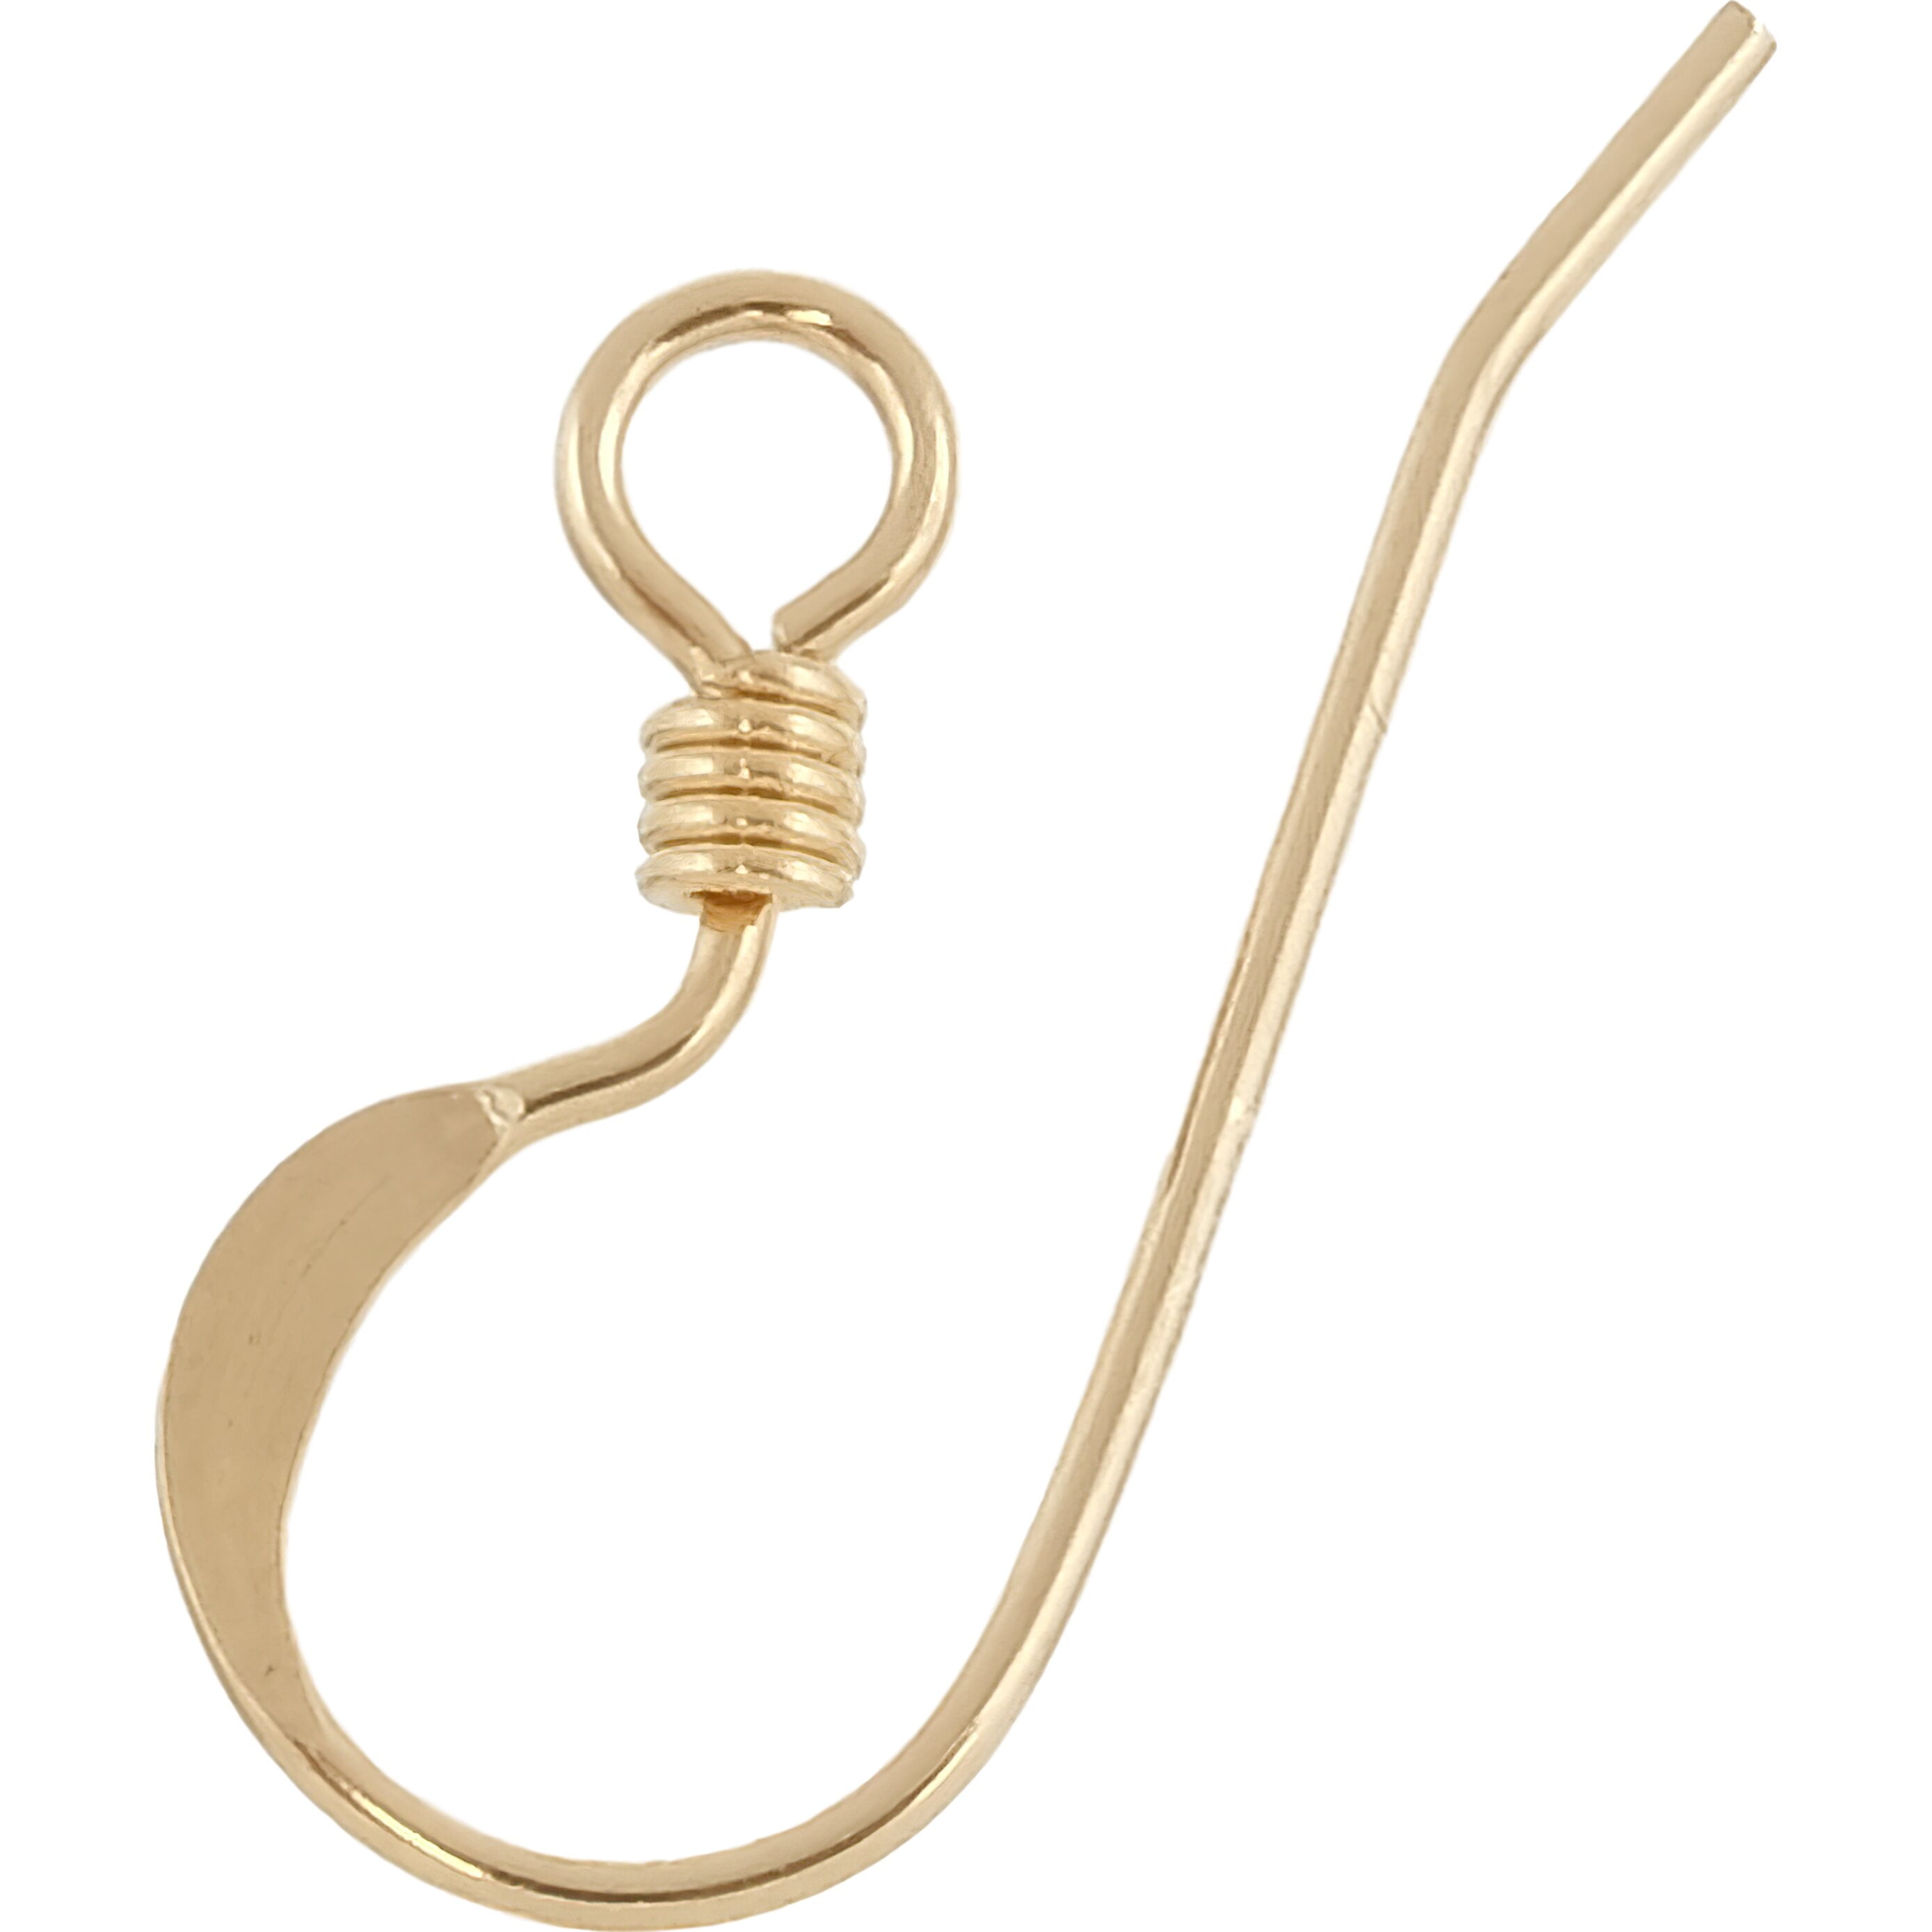 SH207-Fish Hook Earring Wires with 3mm Bead 15x20mm Gold Fil